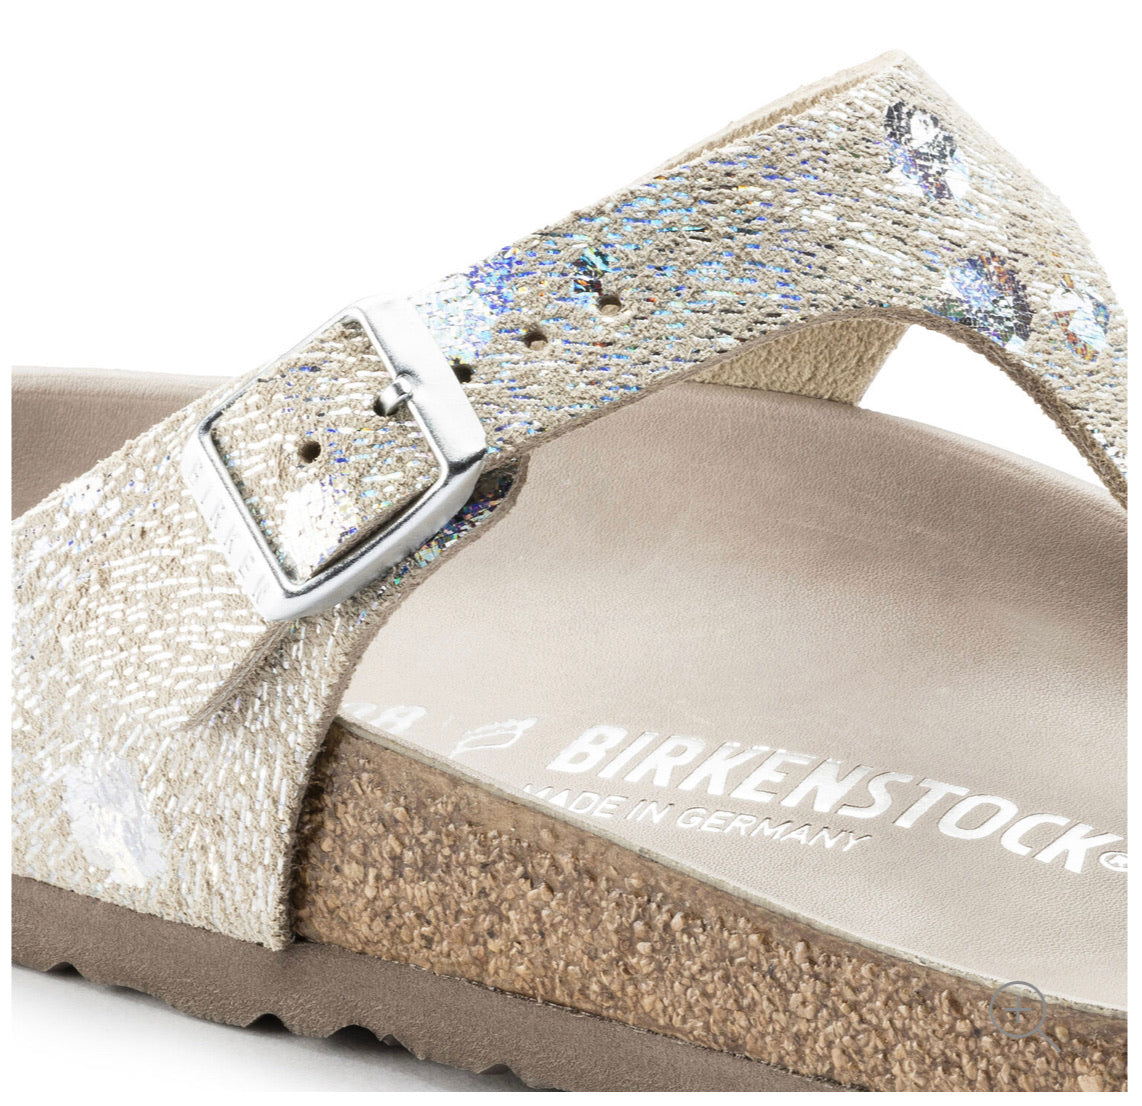 Birkenstock Gizeh Spotted Metallic Silver Leather Made In Germany